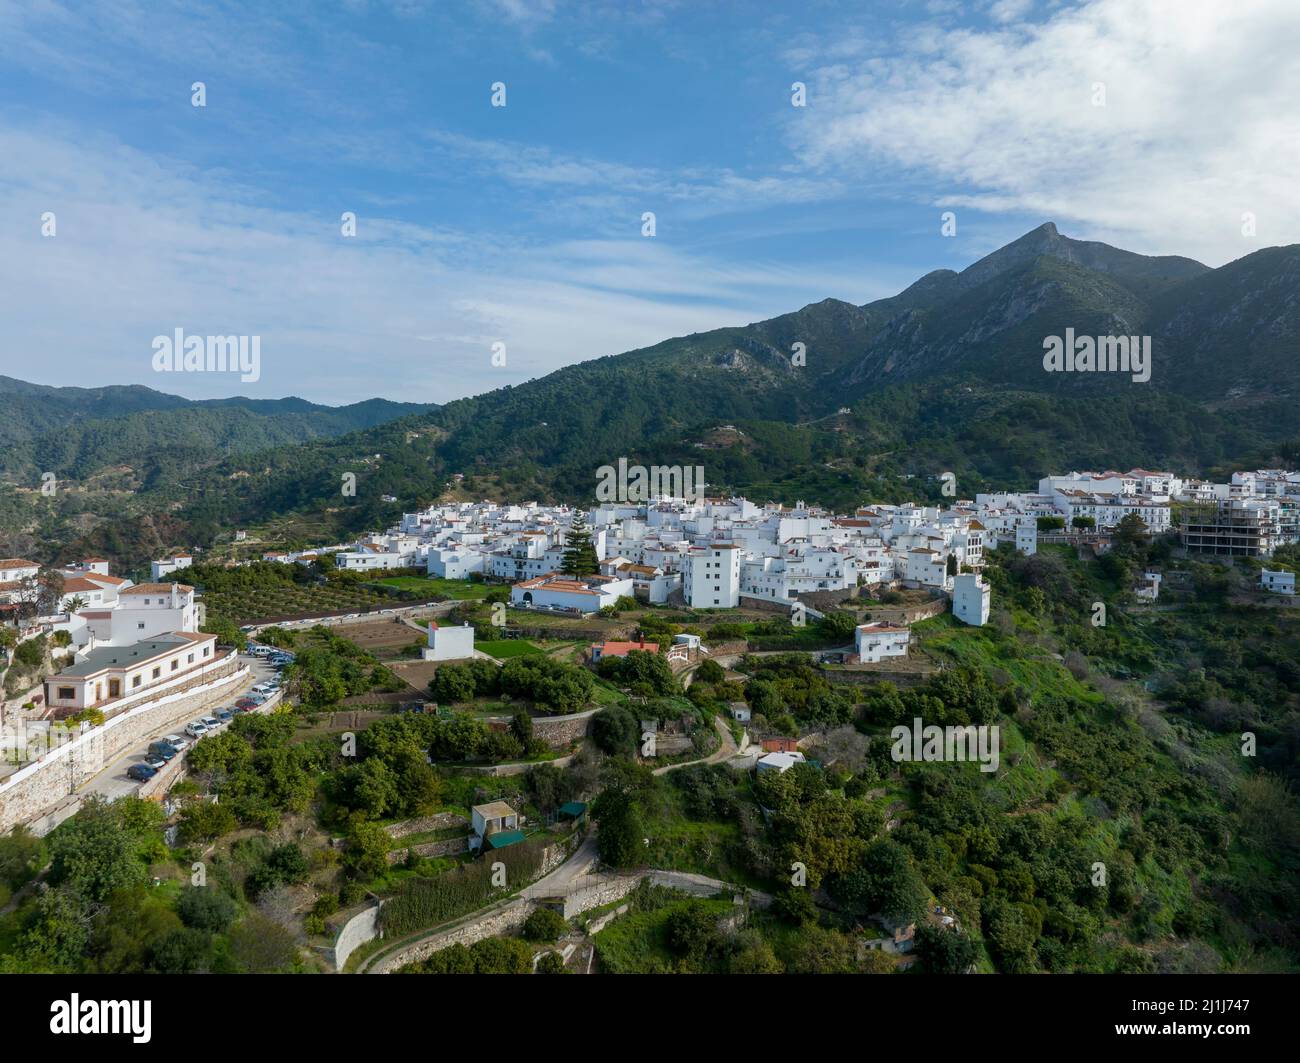 aerial view of the municipality of Istan in the province of Malaga, Spain. Stock Photo